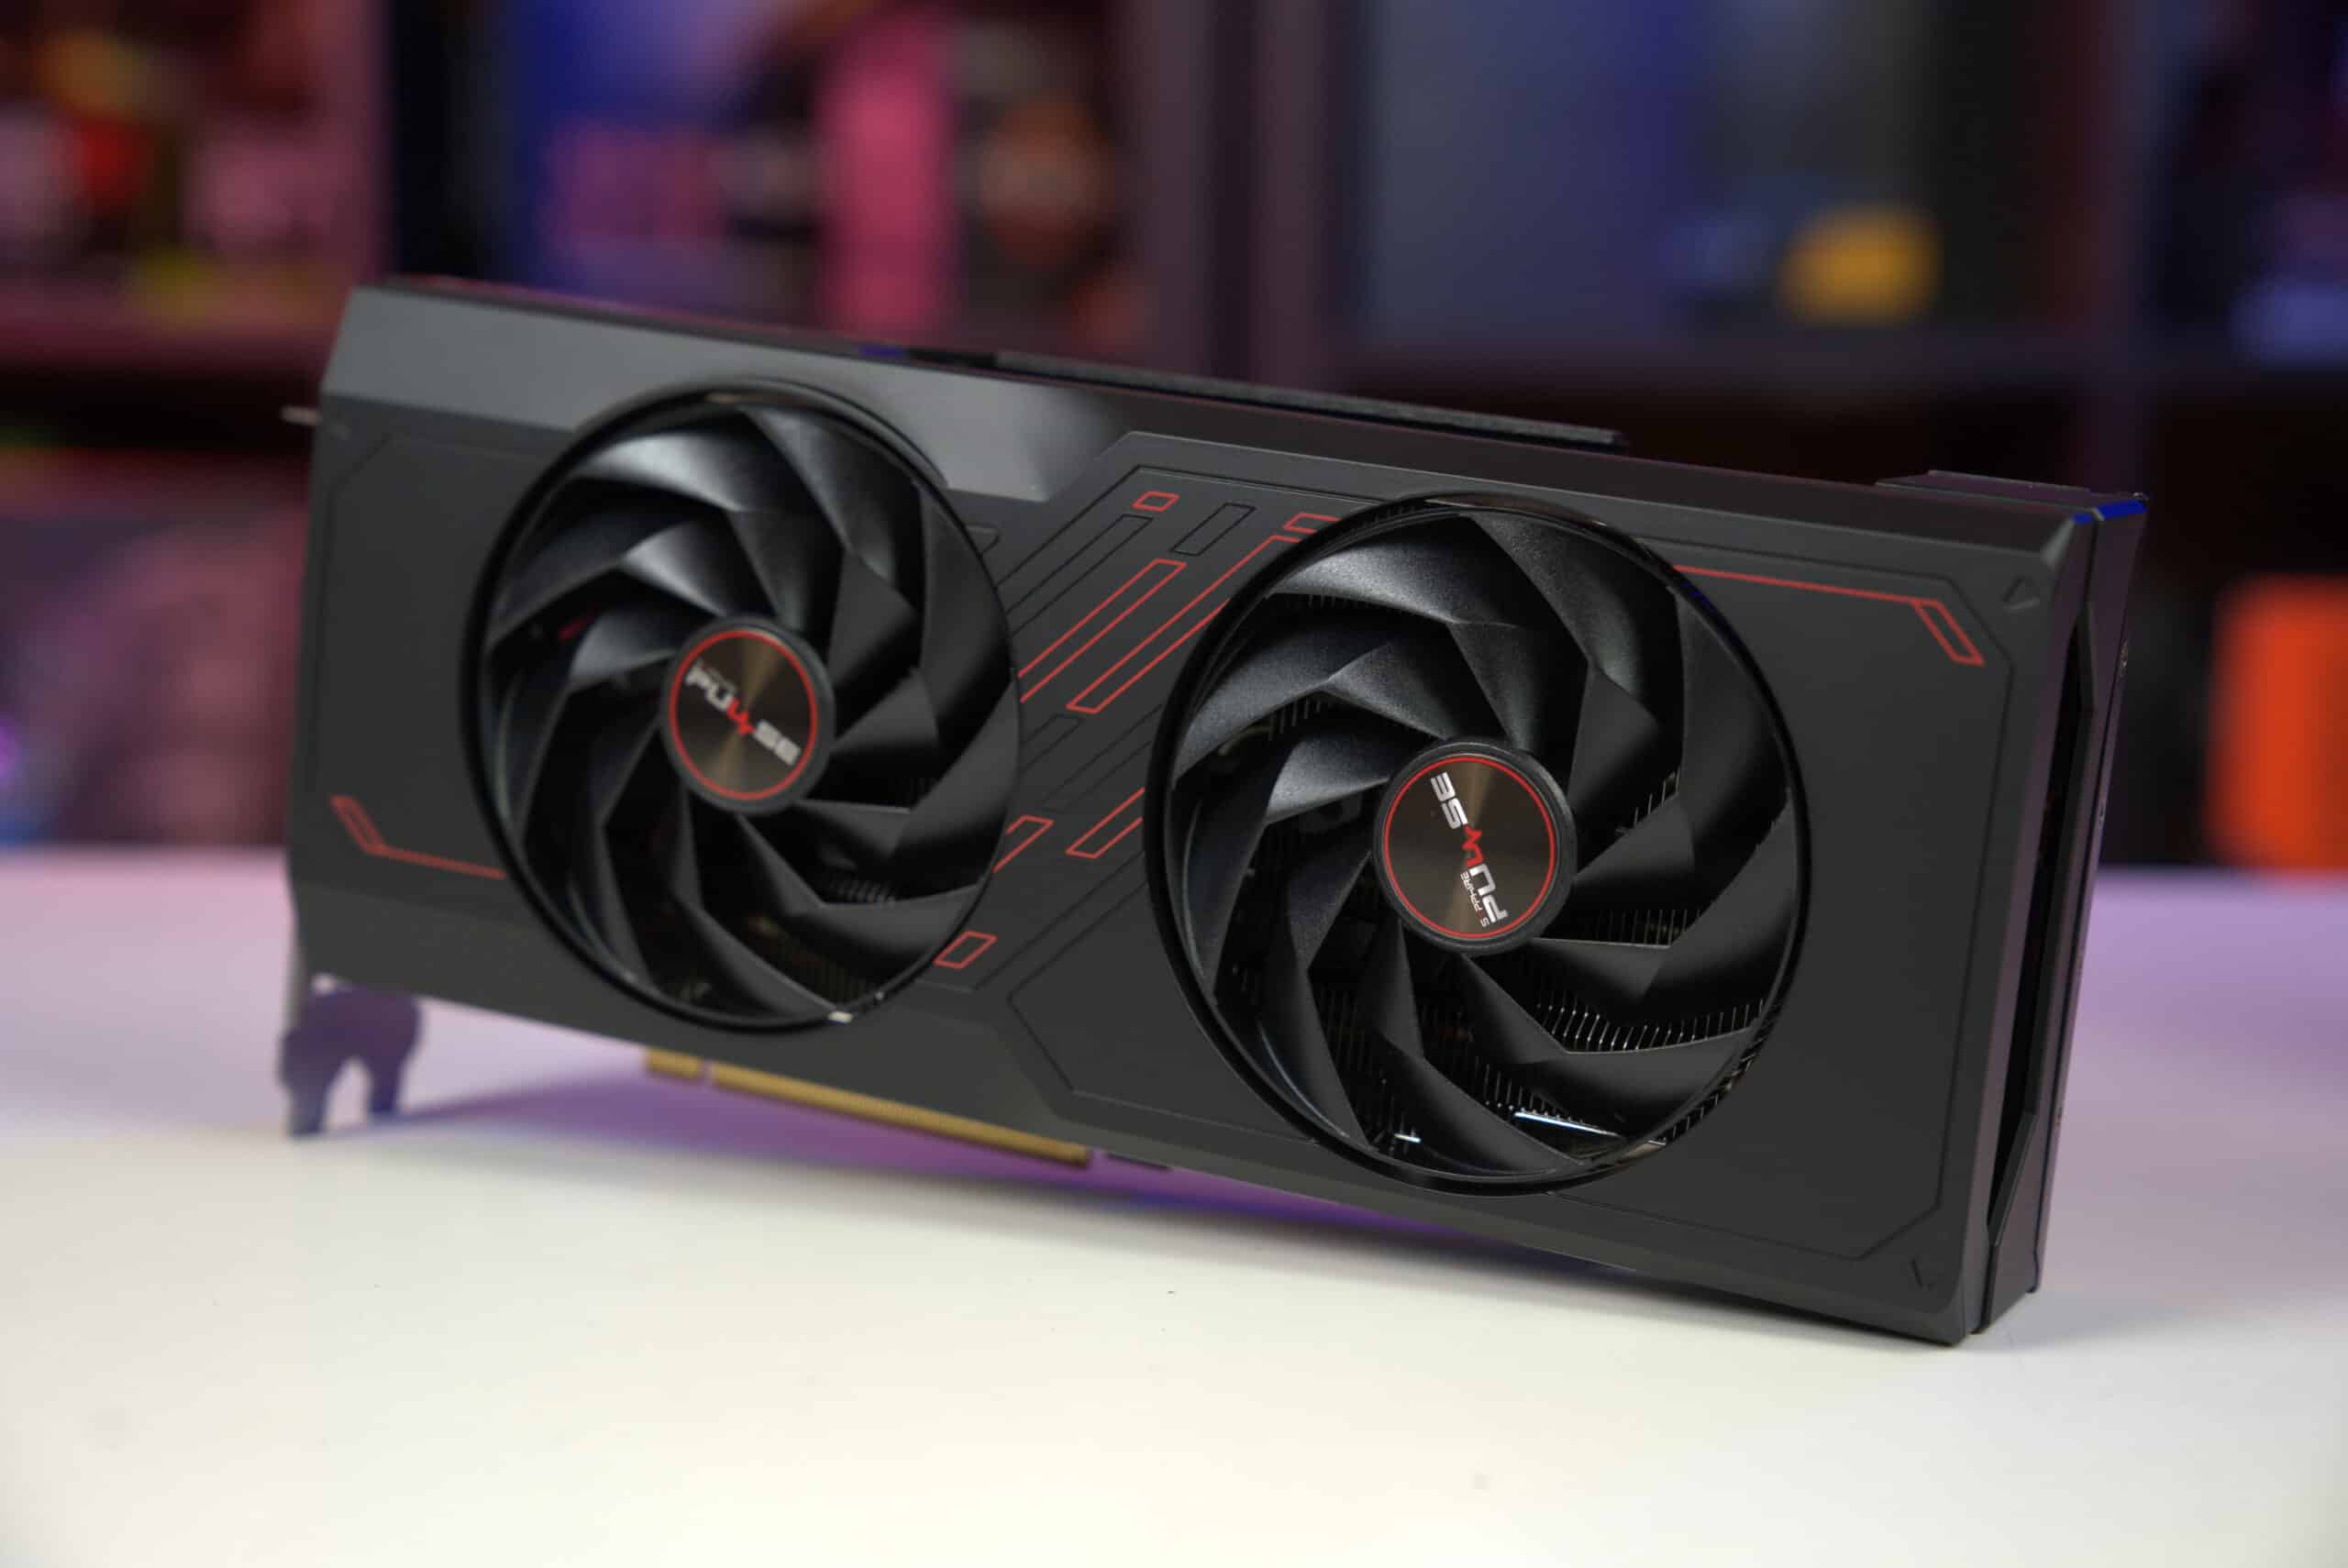 A high-performance RX 7700 XT dual-fan graphics card on a desk with a blurred background.